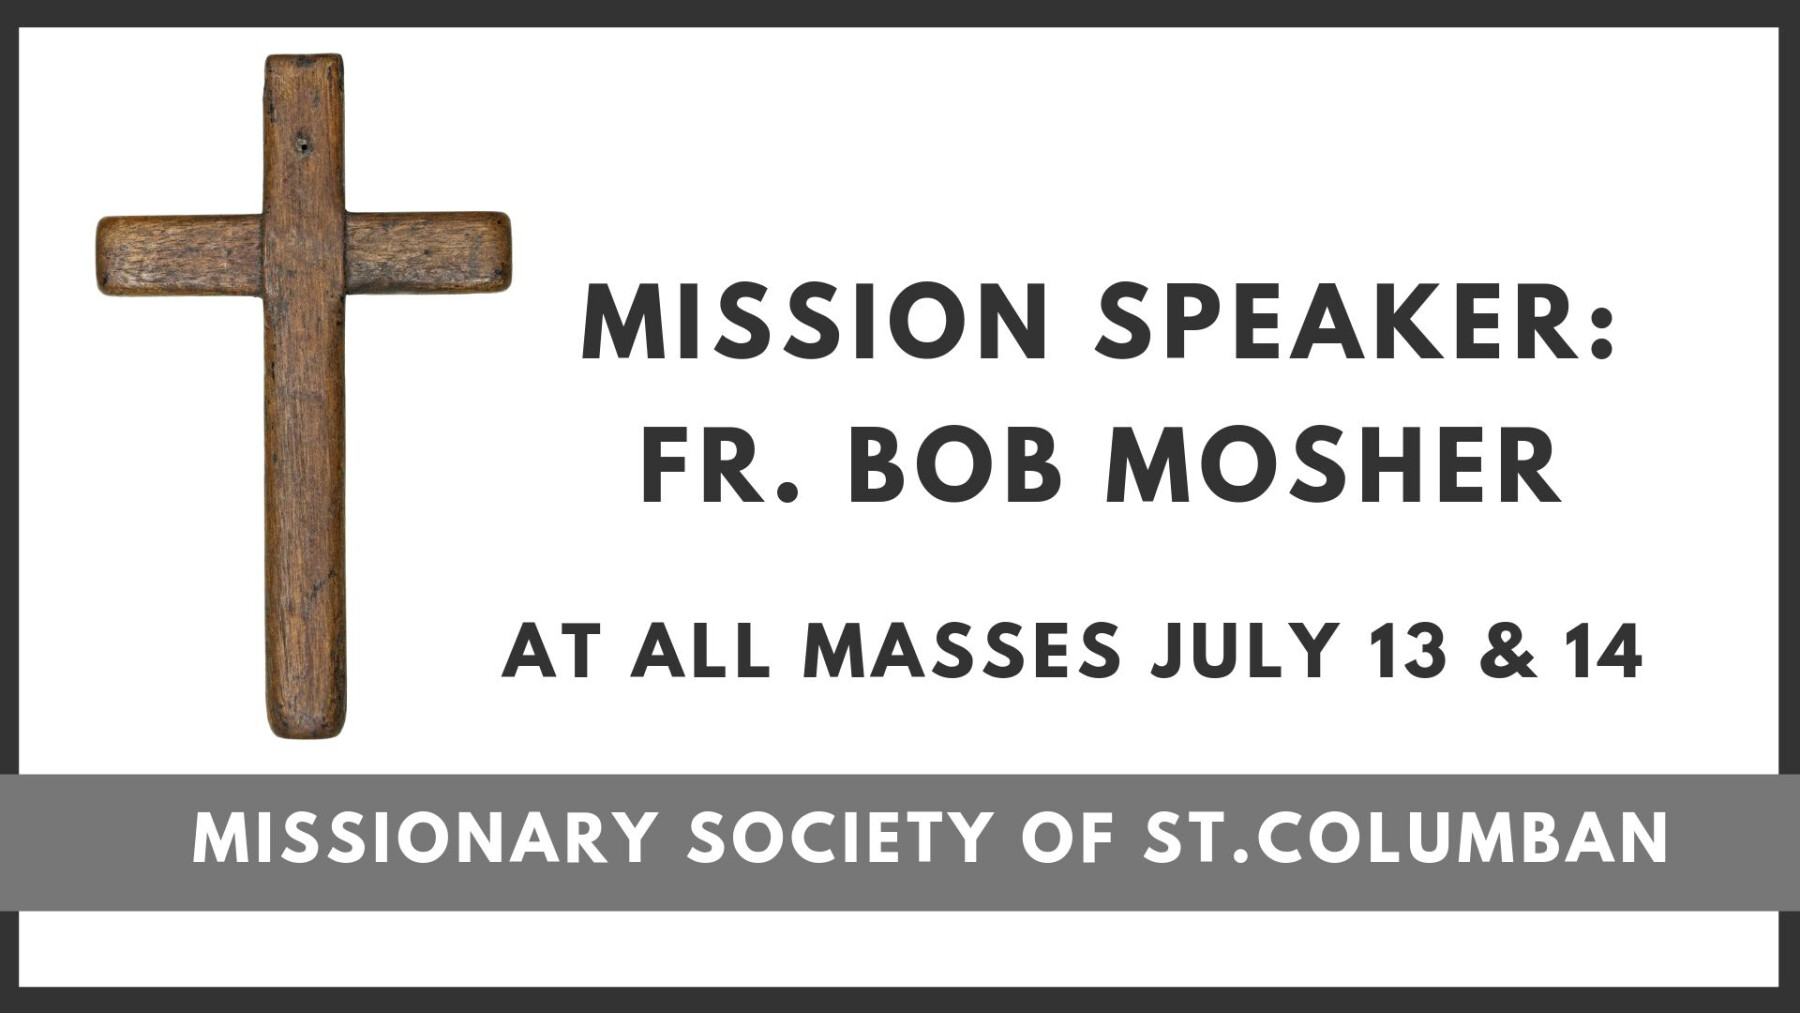 Special Presider and Collection for the Missionary Society of St. Columban